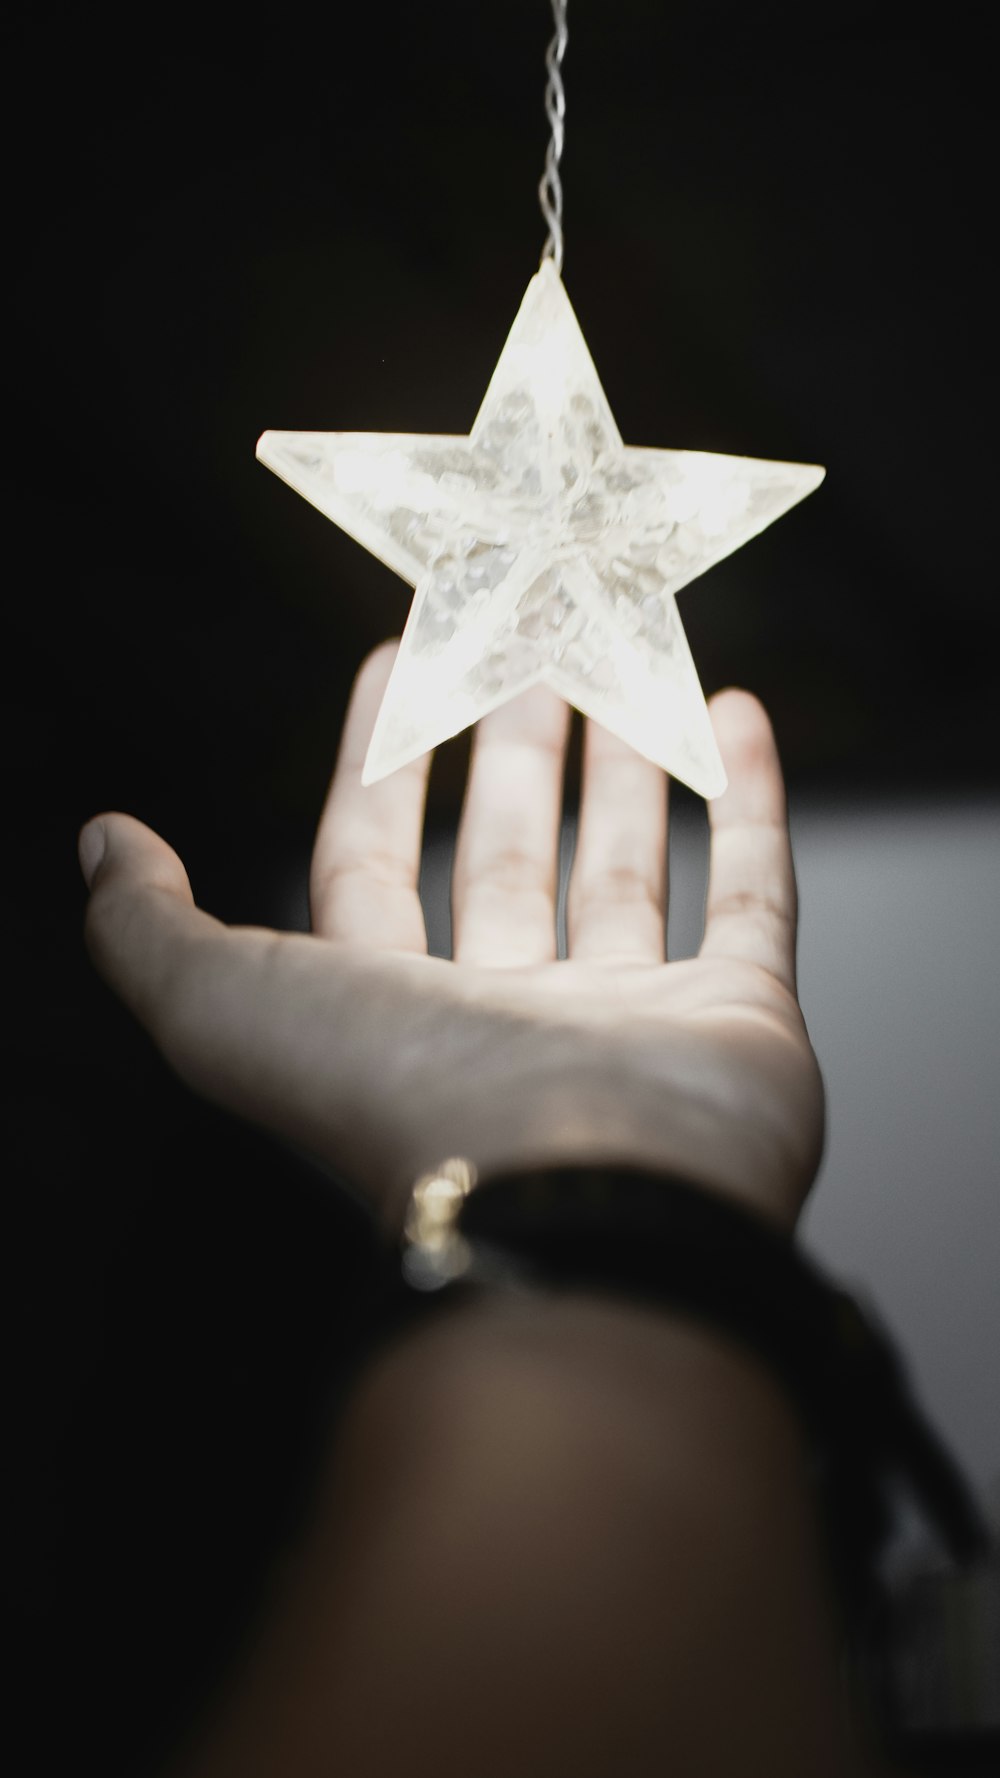 person touching LED light star